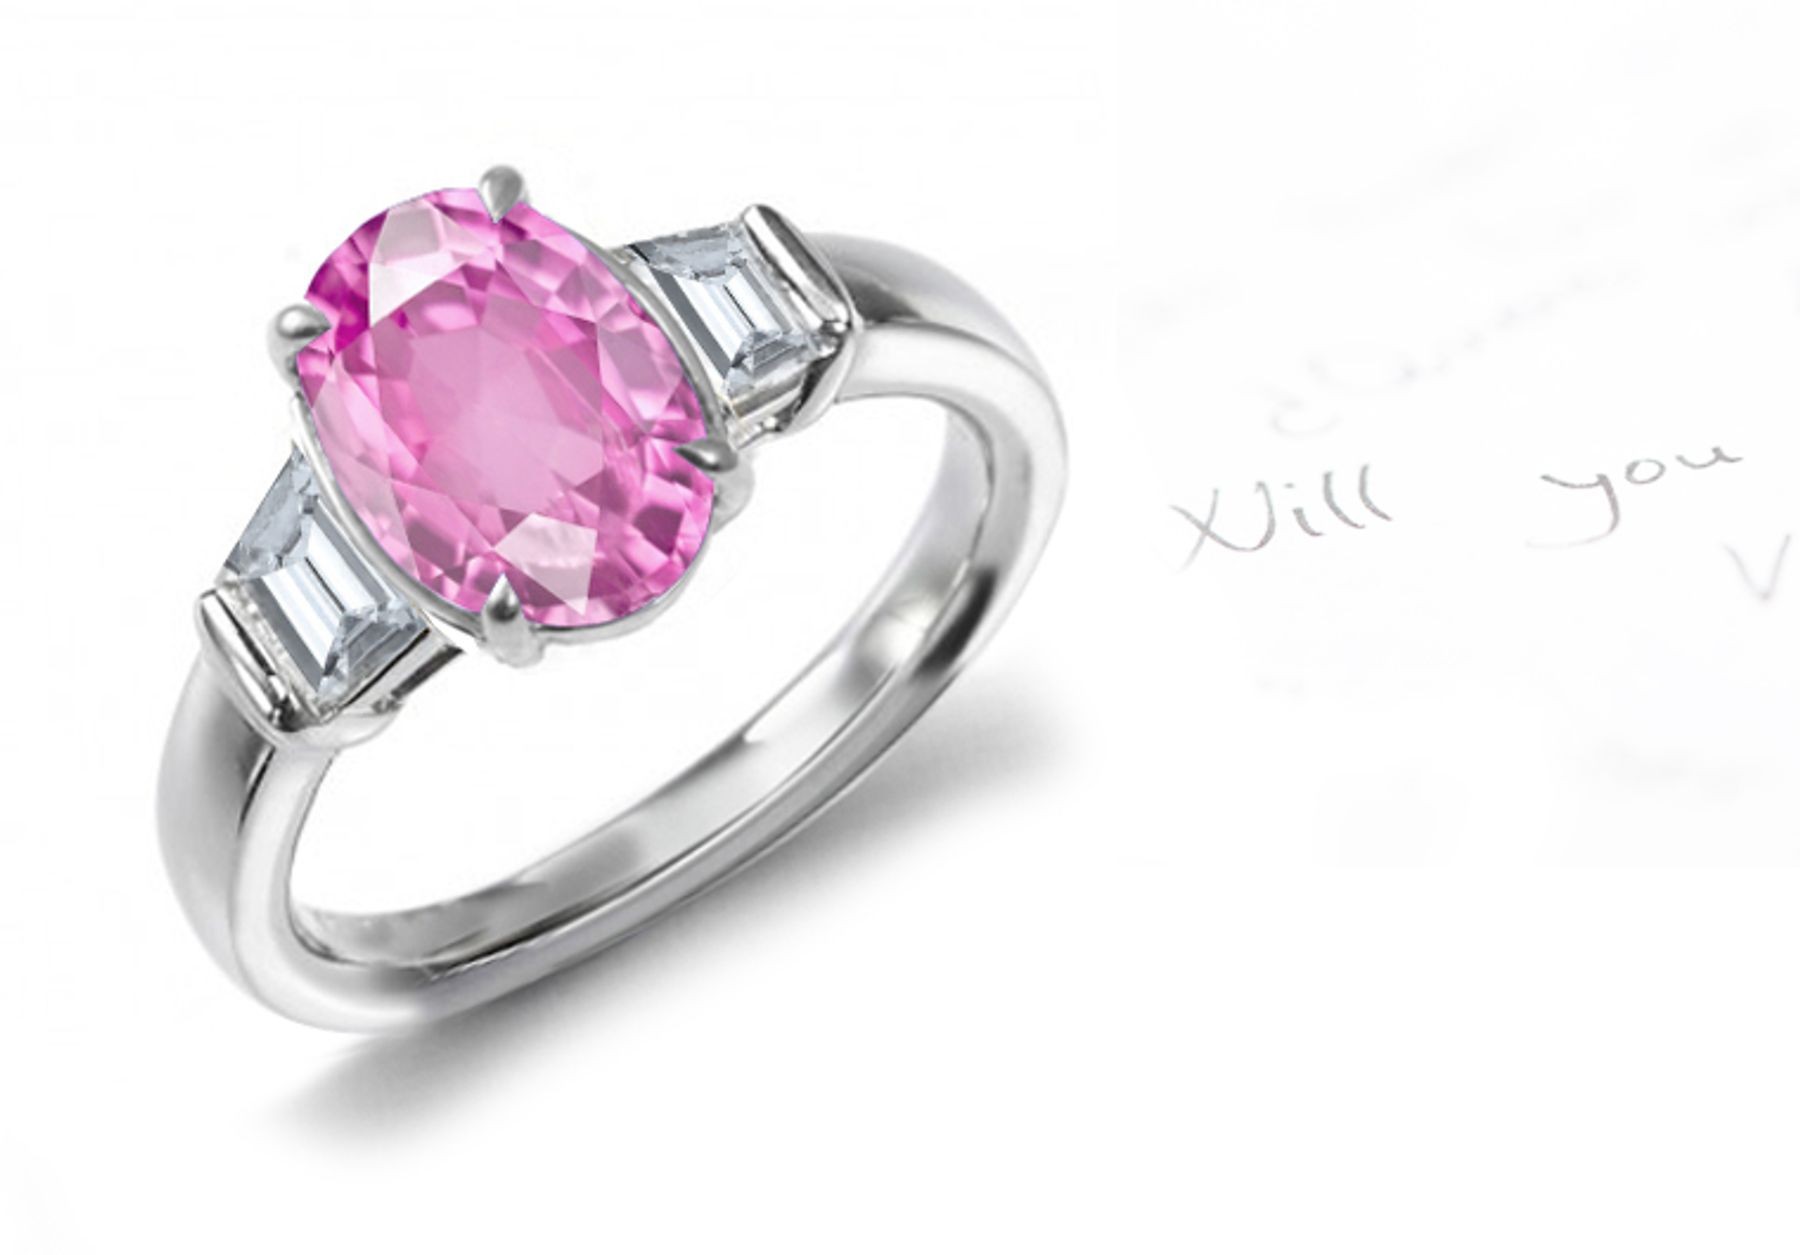 Beating Its Wings: 3 Stone Oval Rich Pink Sapphire & Trapezoid White Diamonds Gold Ring